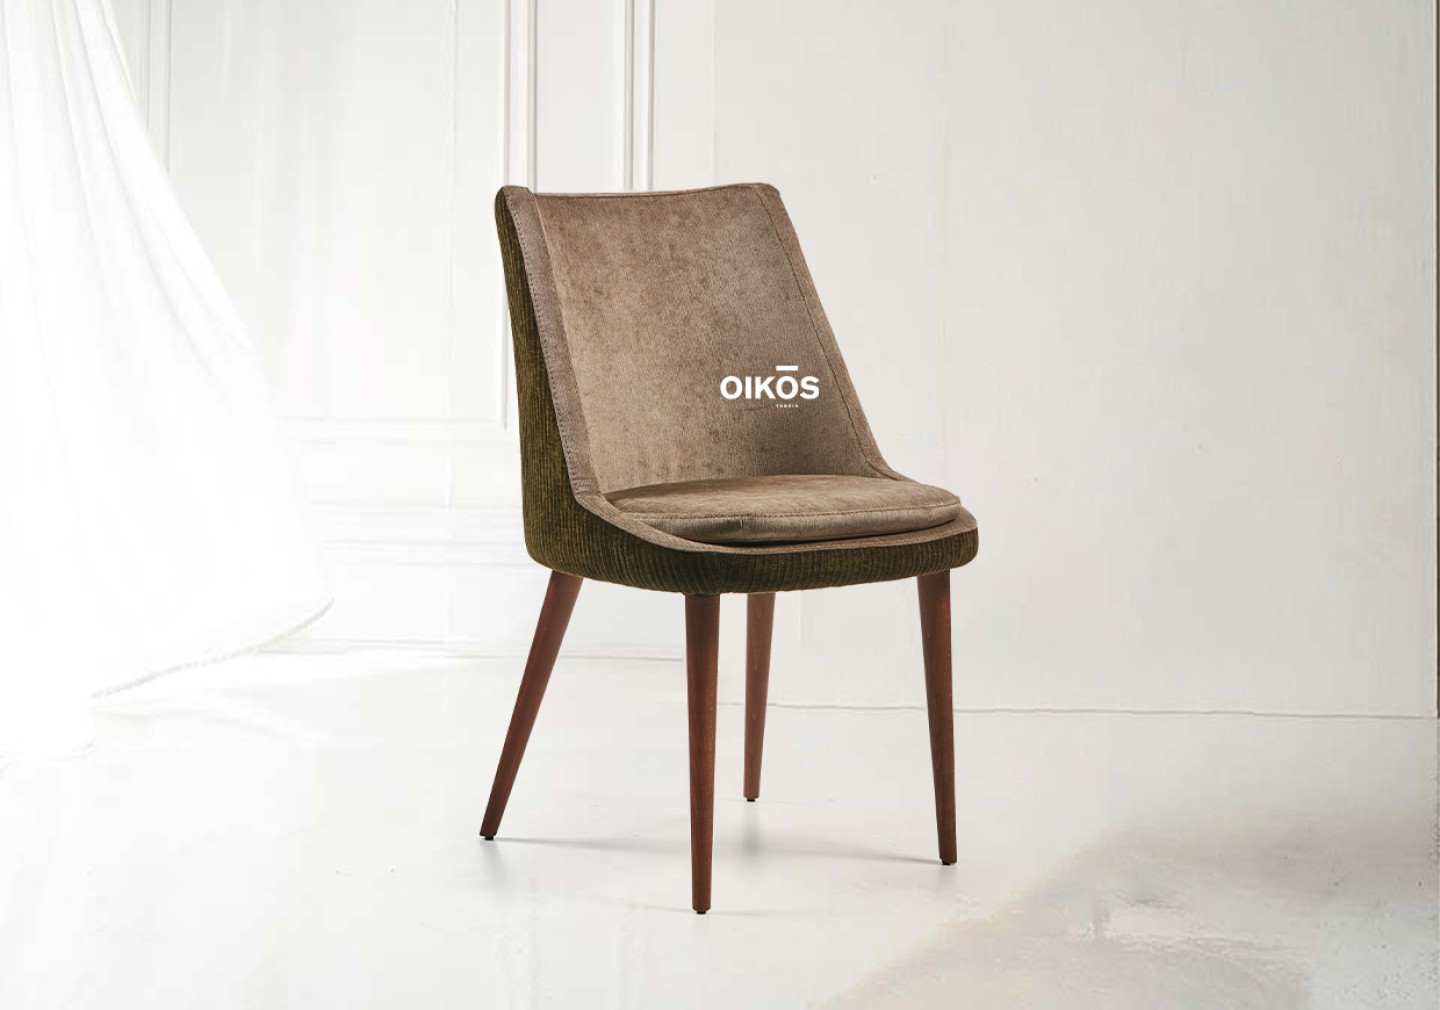 THE SISILY DINING CHAIR